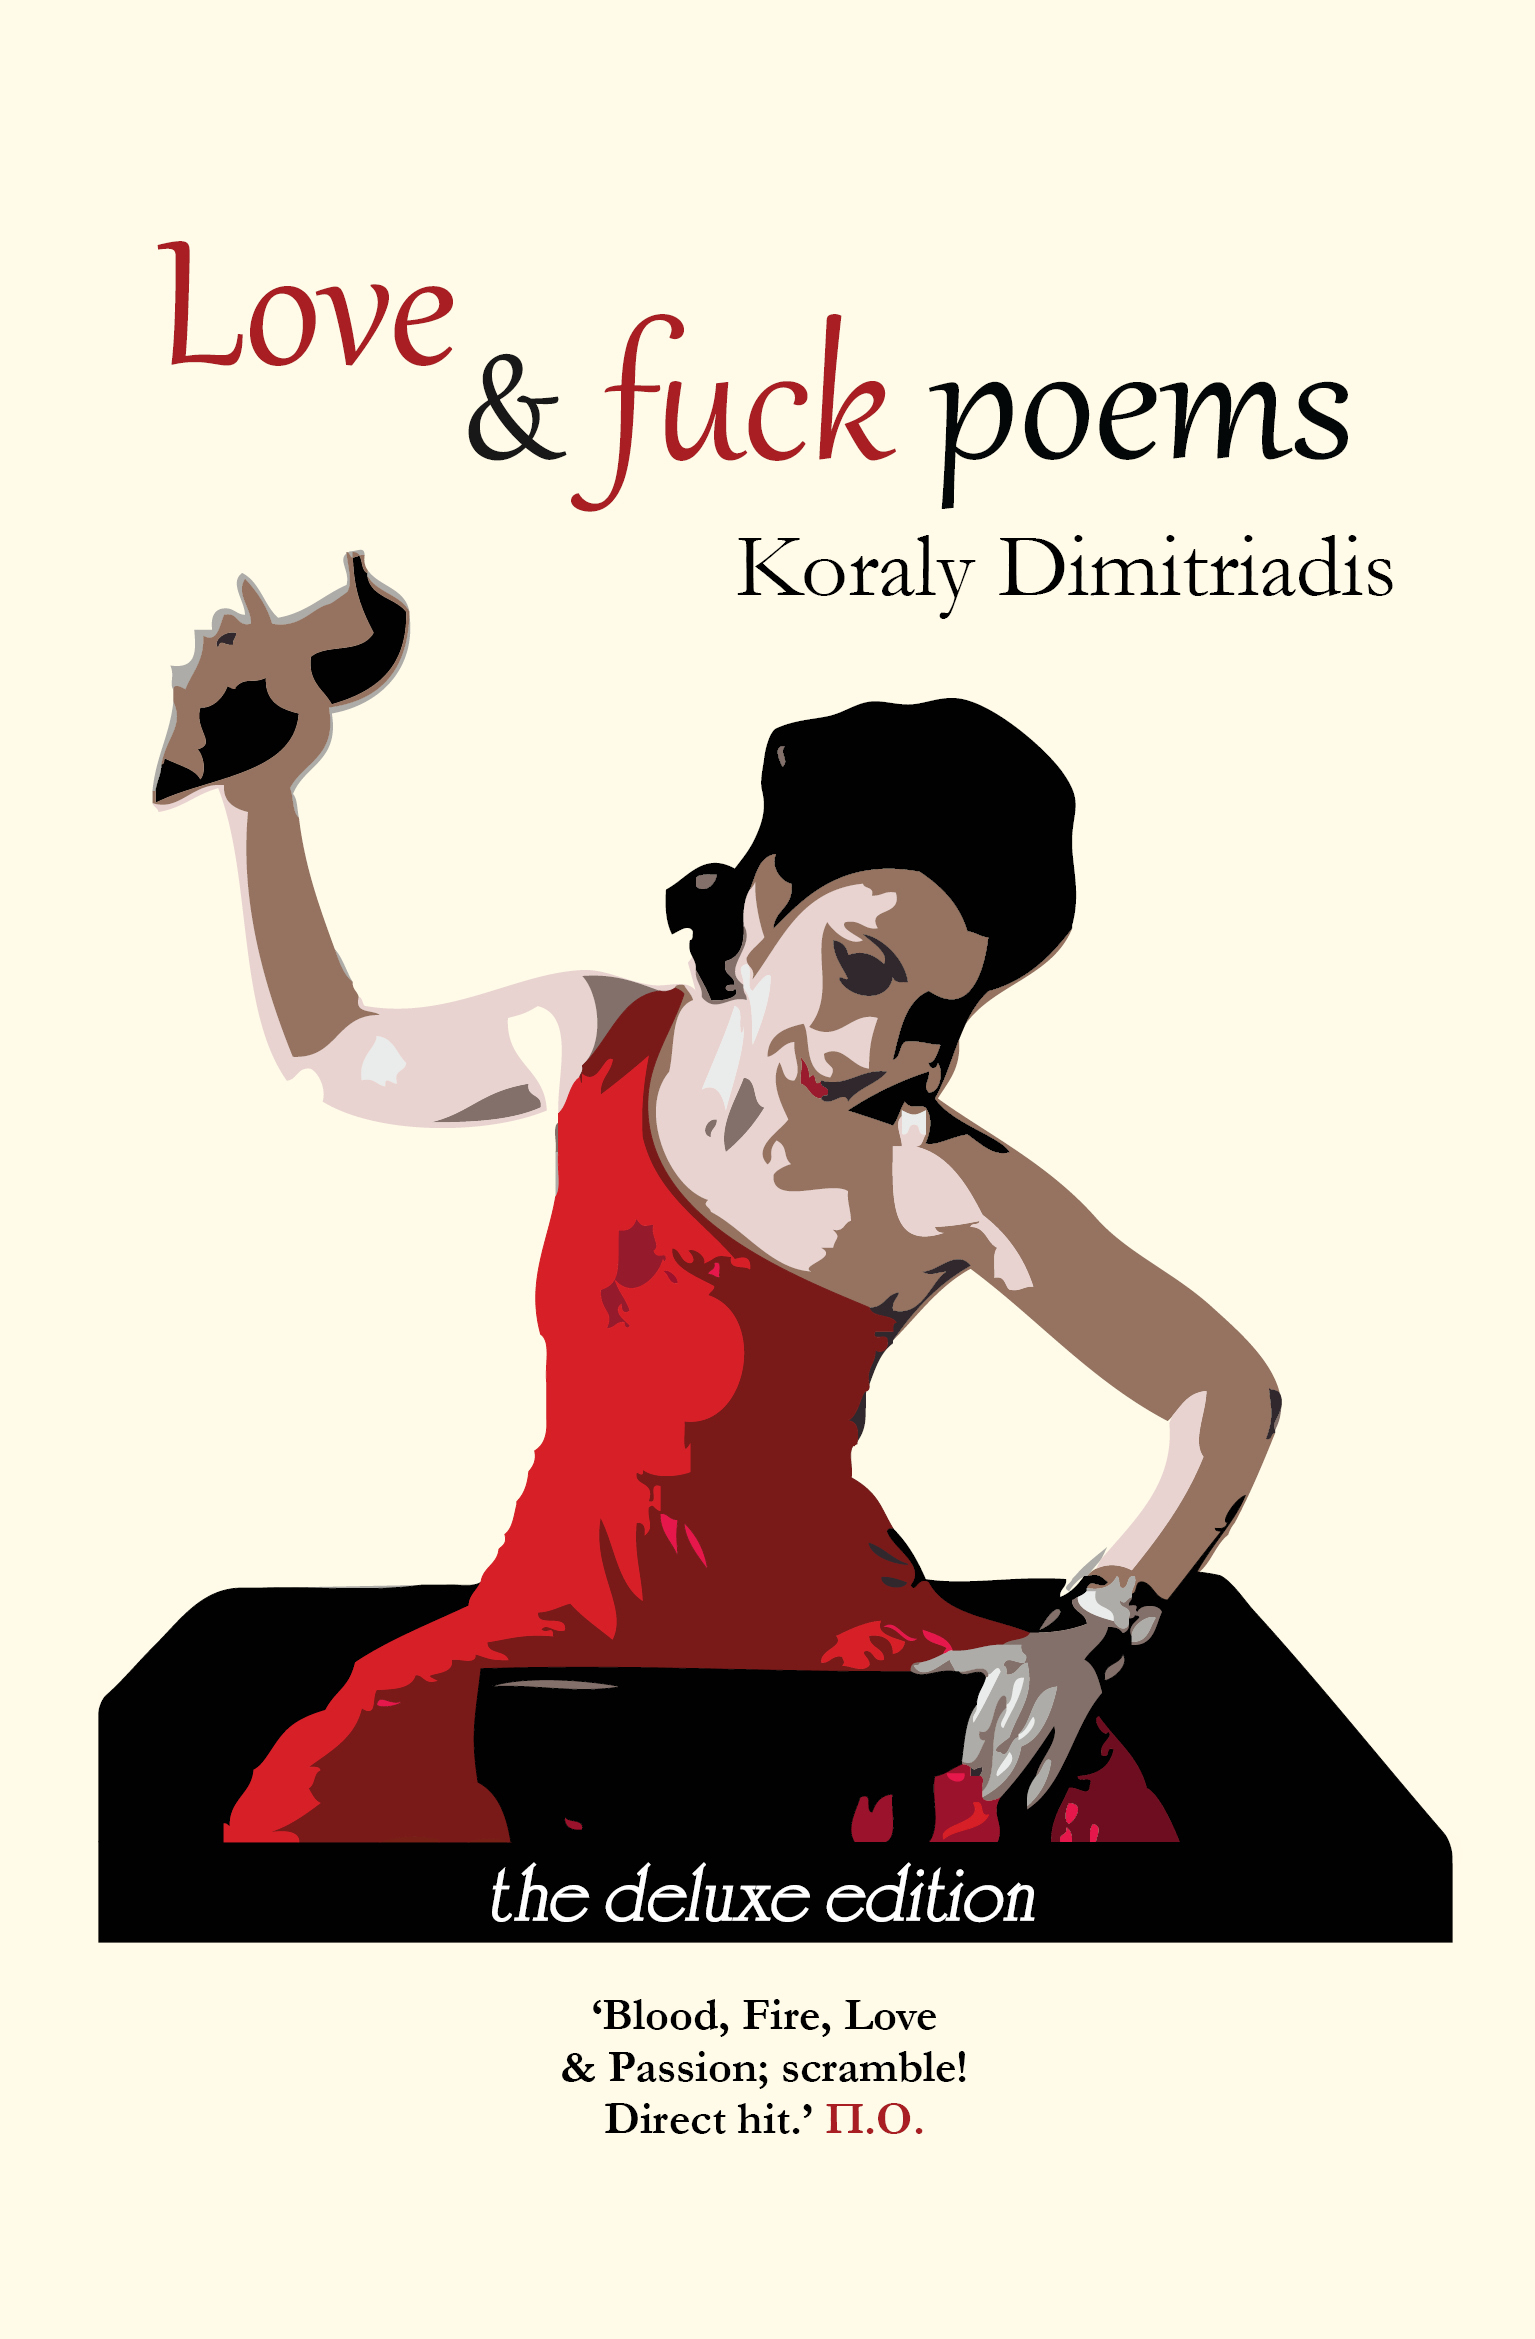 Bestselling Book Love and F#ck Poems Hits UK HuffPost Contributor